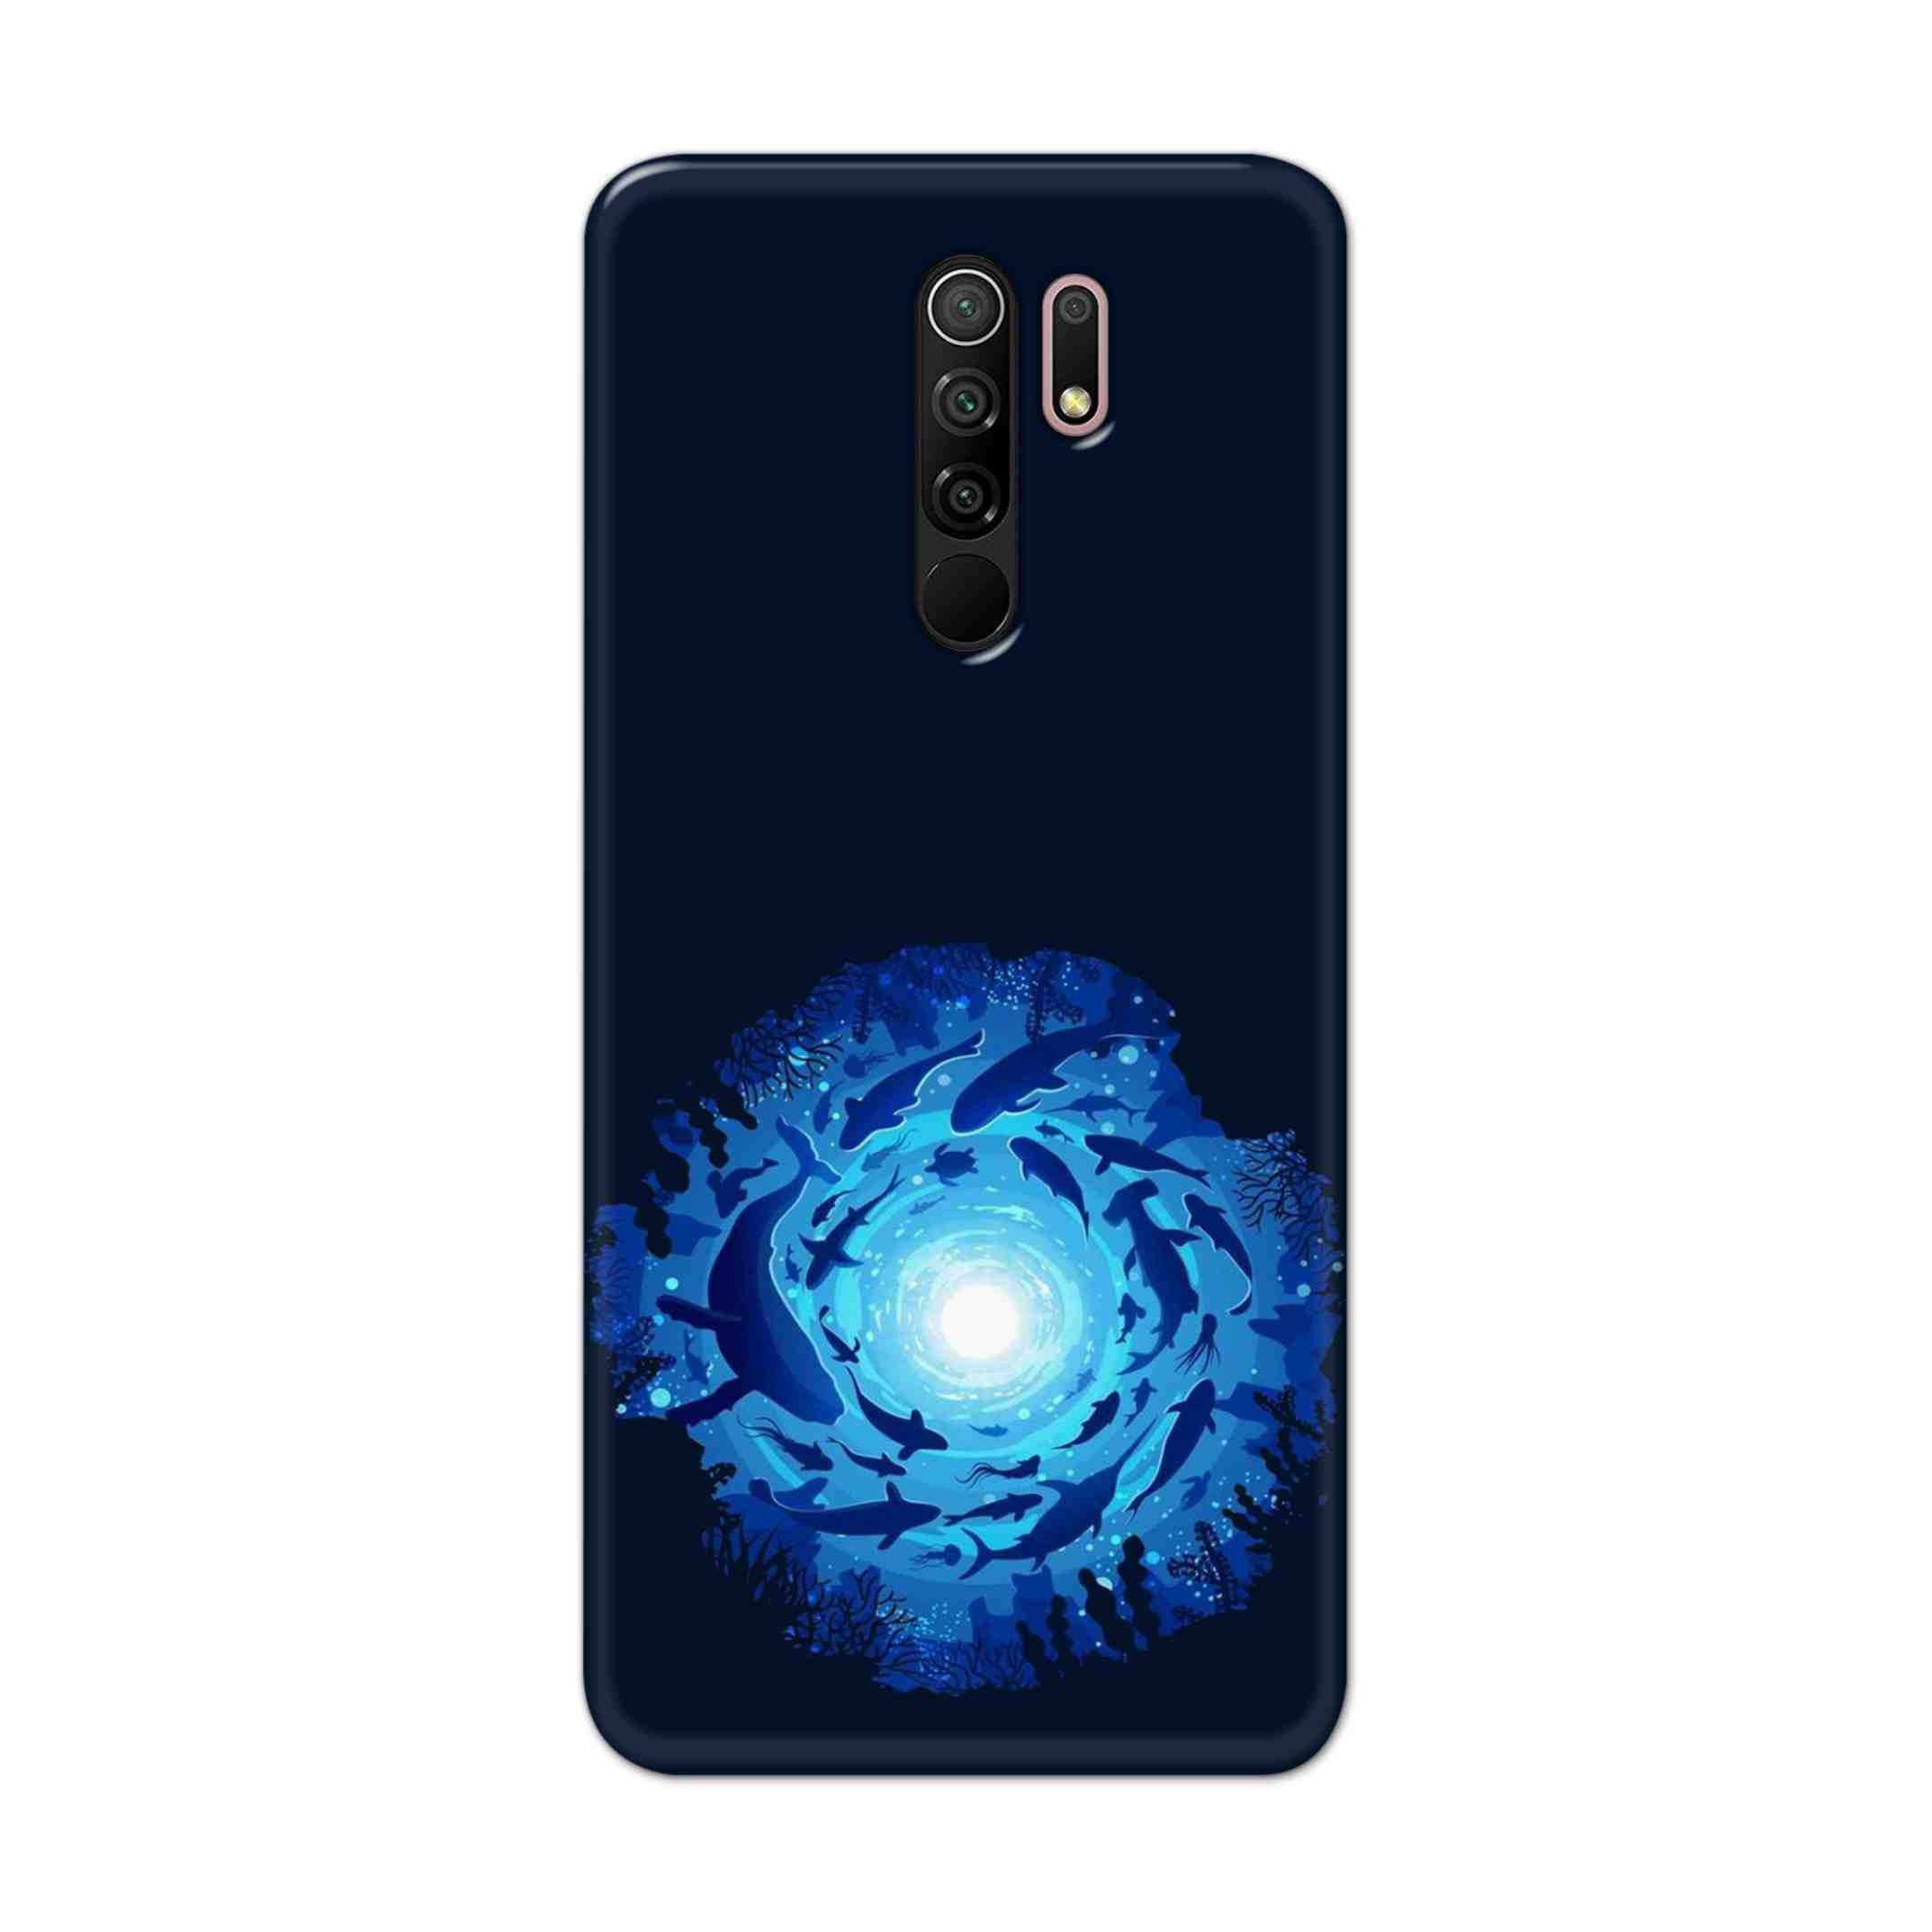 Buy Blue Whale Hard Back Mobile Phone Case Cover For Xiaomi Redmi 9 Prime Online